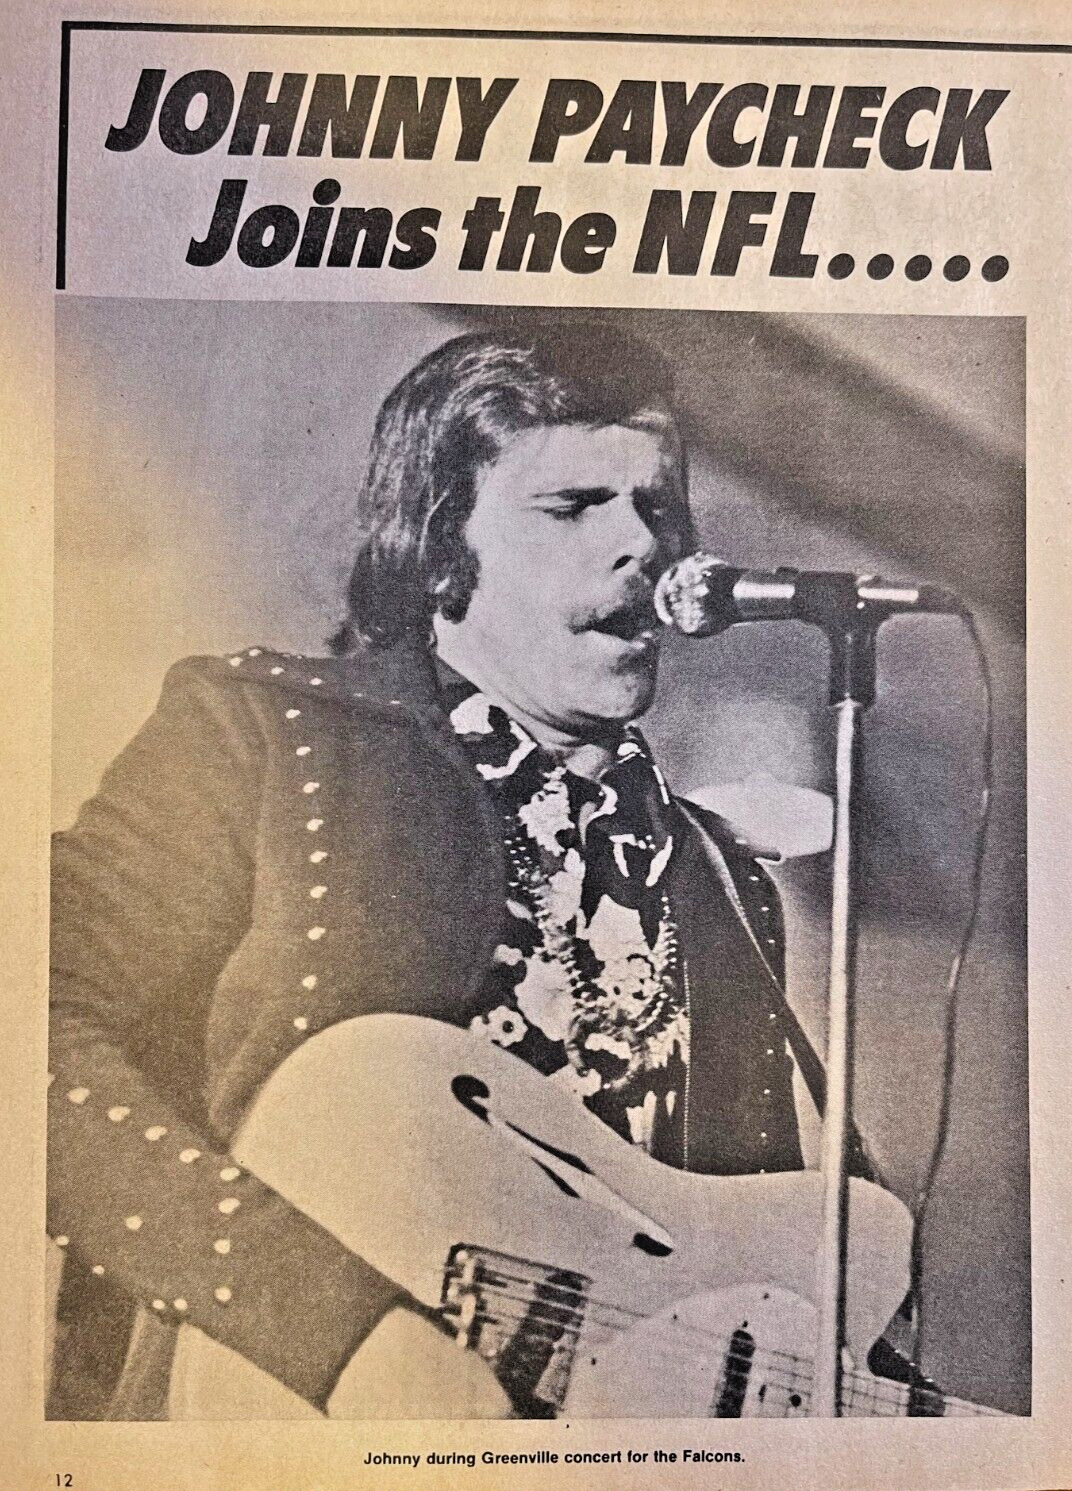 1974 Country Singer Johnny Paycheck